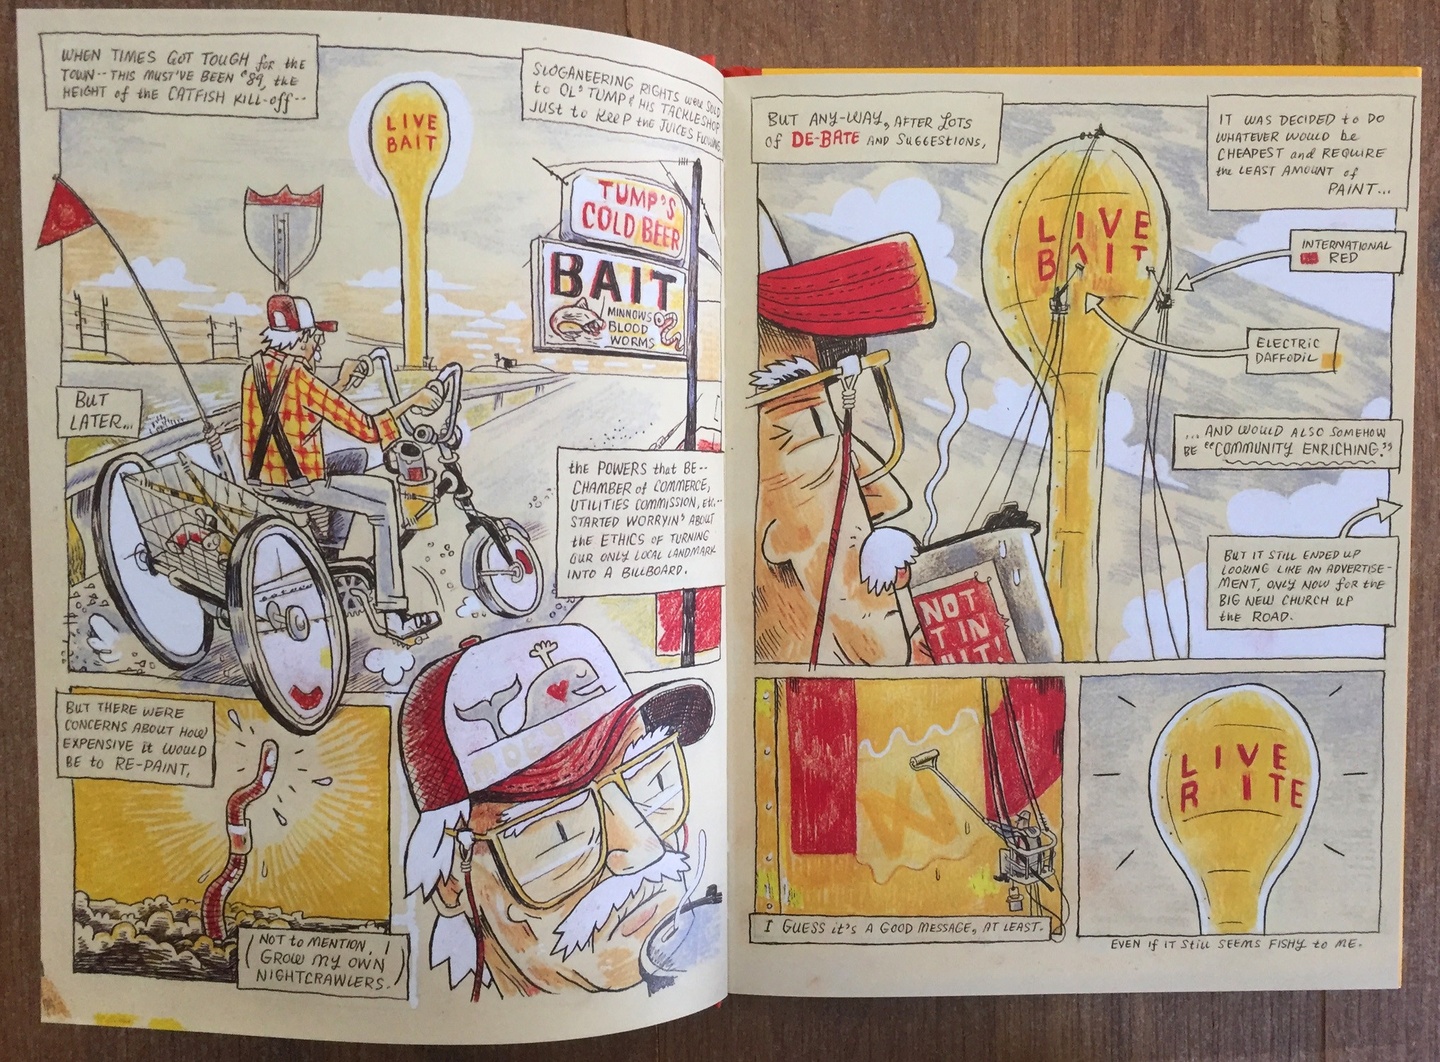 An open spread of a graphic novel: the color scheme is a warm cream/yellow-red, and the text reads, "When times got tough for the town — this must've been '89, the height of the catfish kill-off... sloganeering rights were sold to Ol' Tump & his tackle shop just to keep the juices flowing. But later... the powers that be — chambers of commerce, utilities commission, etc. — started worryin' about the ethics of turning our only local landmark into a billboard. But there were concerns about how expensive it would be to re-paint. (not to mention, I grow my own nightcrawlers.) But any-way, after lots of de-bate and suggestions, it was decided to do whatever would be cheapest and require the least amount of paint... [international red], [electric daffodil] ... and would also somehow be "community enriching." But it still ended up looking like an advertisement, only now for the big new church up the road. I guess it's a good message, at least. Even if it still seems fishy to me."